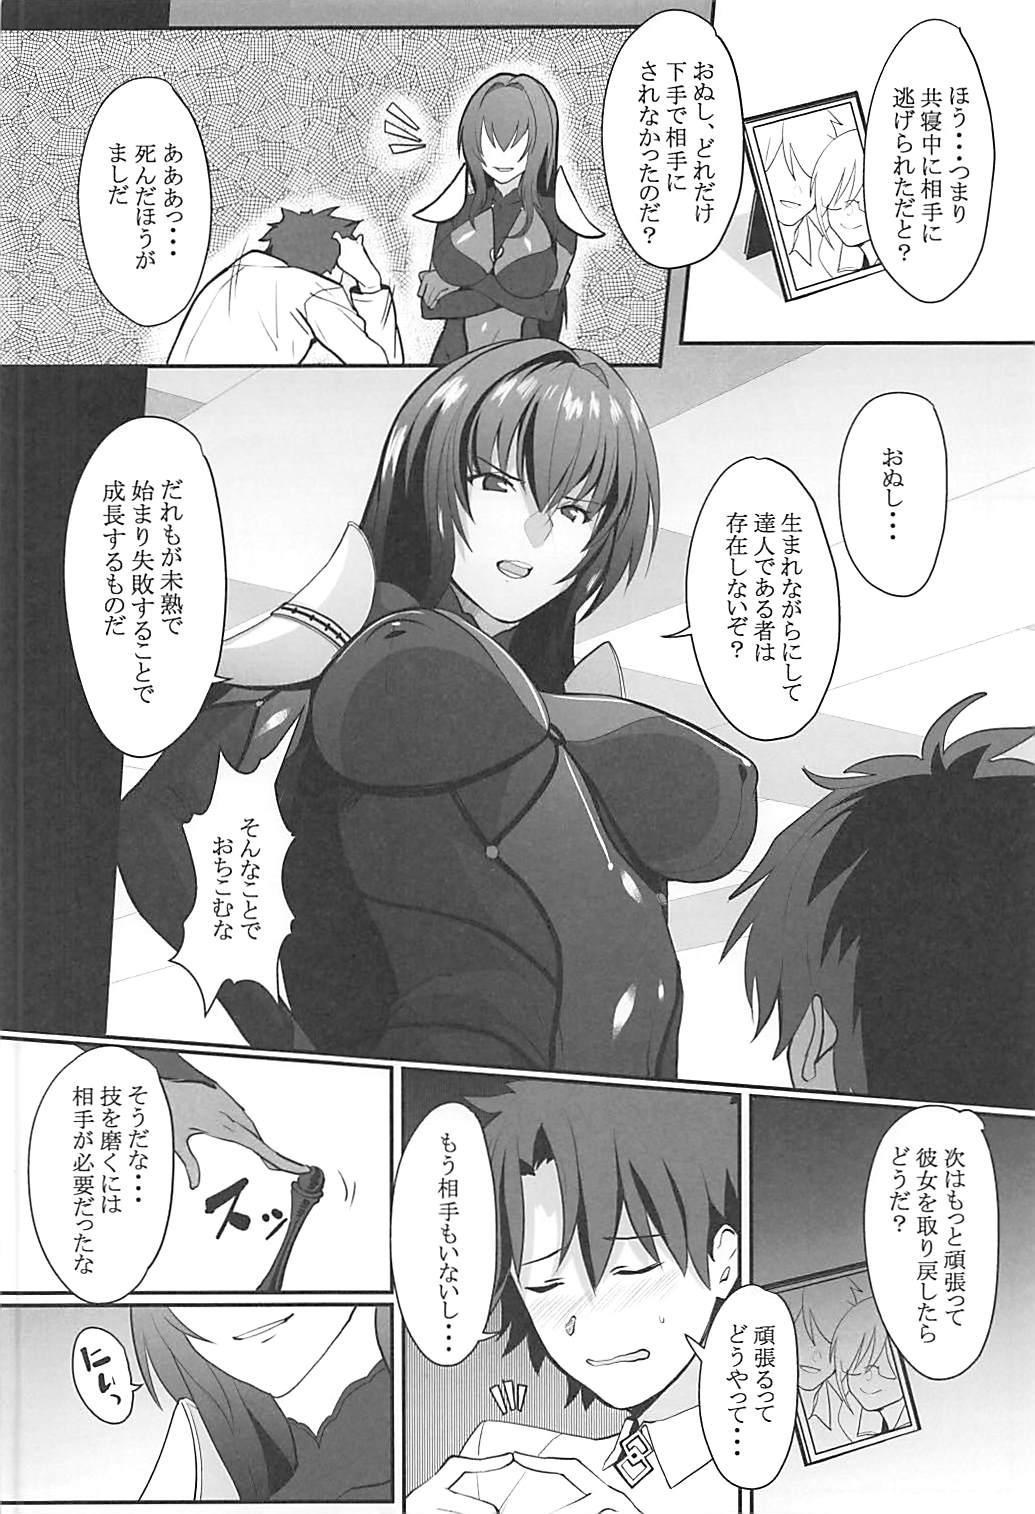 Jerk Off Scathach Shishou no Dosukebe Lesson - Fate grand order Gaygroup - Page 3